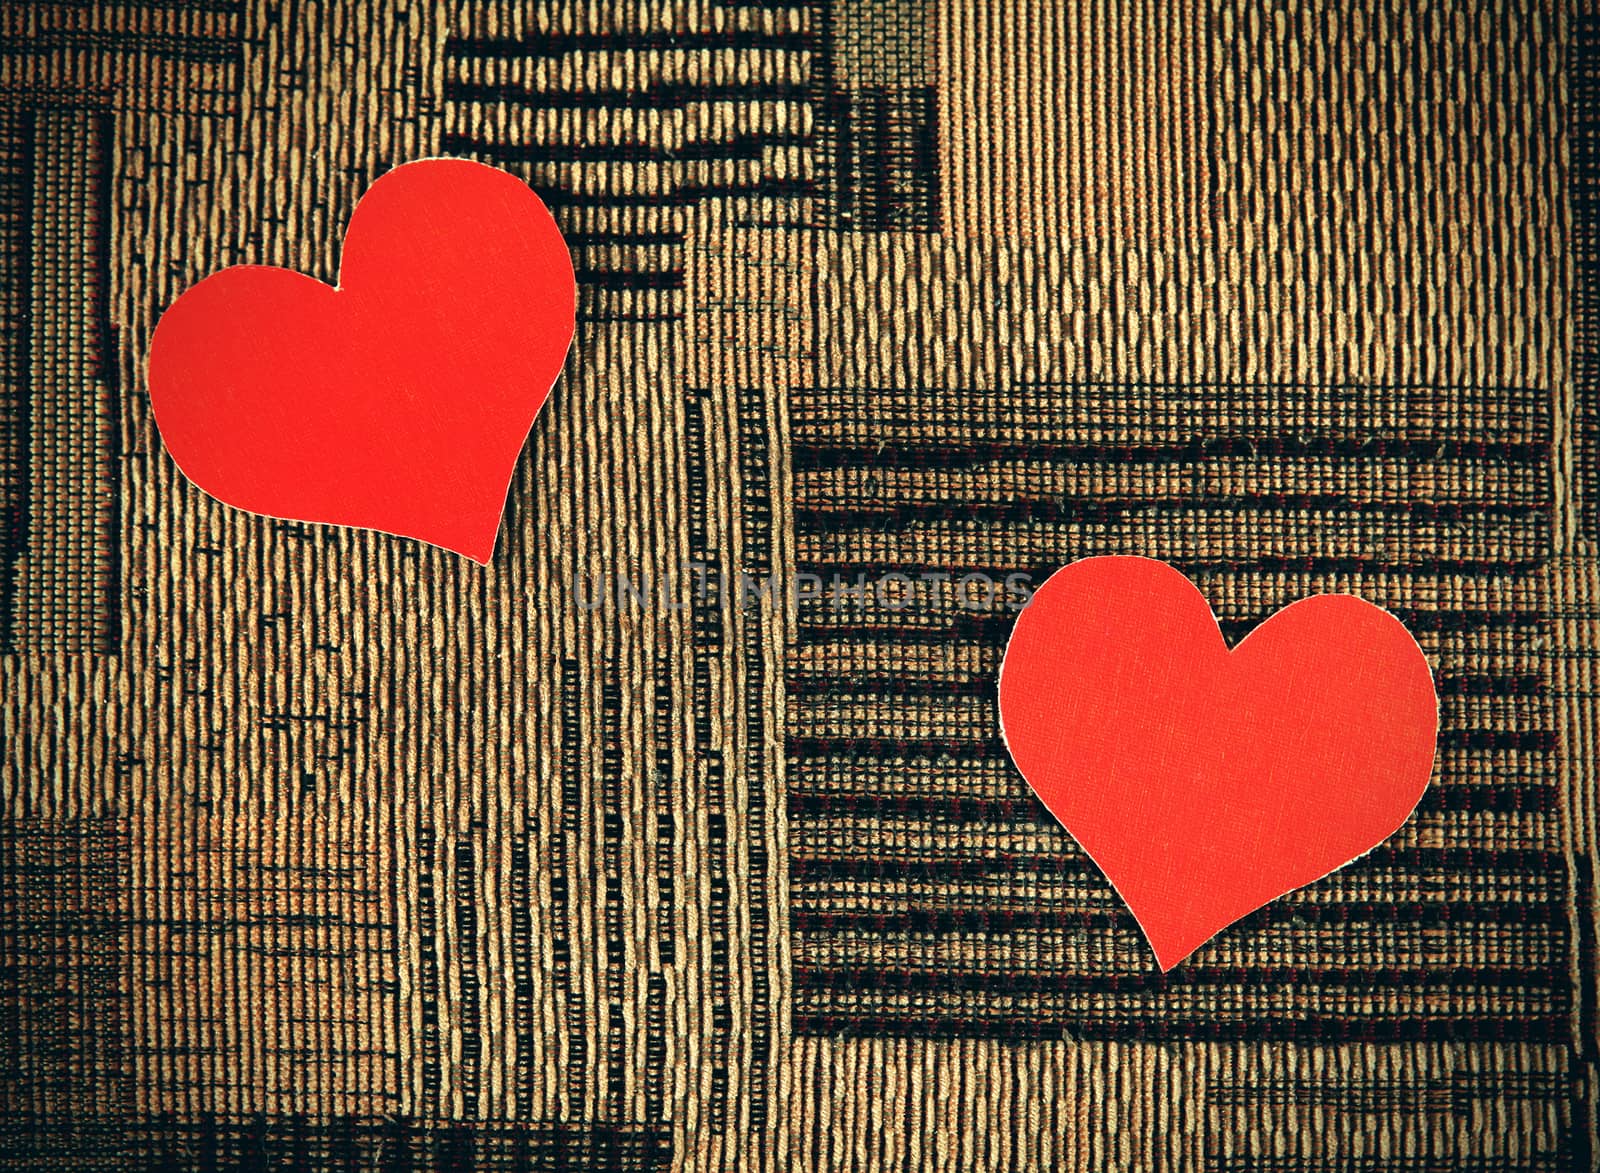 Two Heart Shapes on the Fabric Background